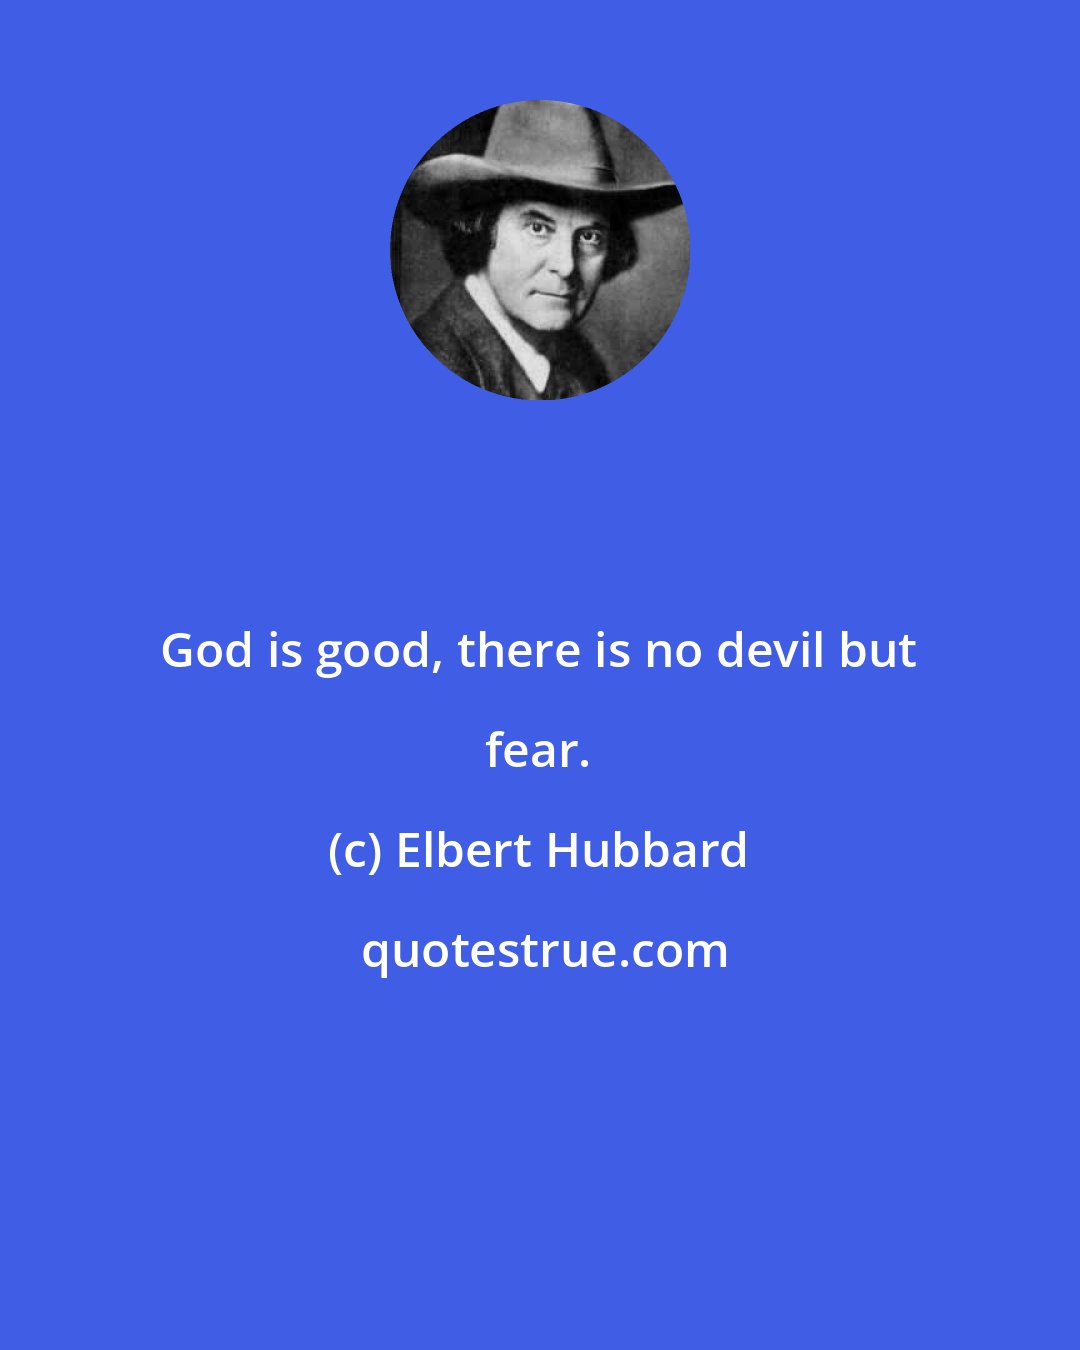 Elbert Hubbard: God is good, there is no devil but fear.